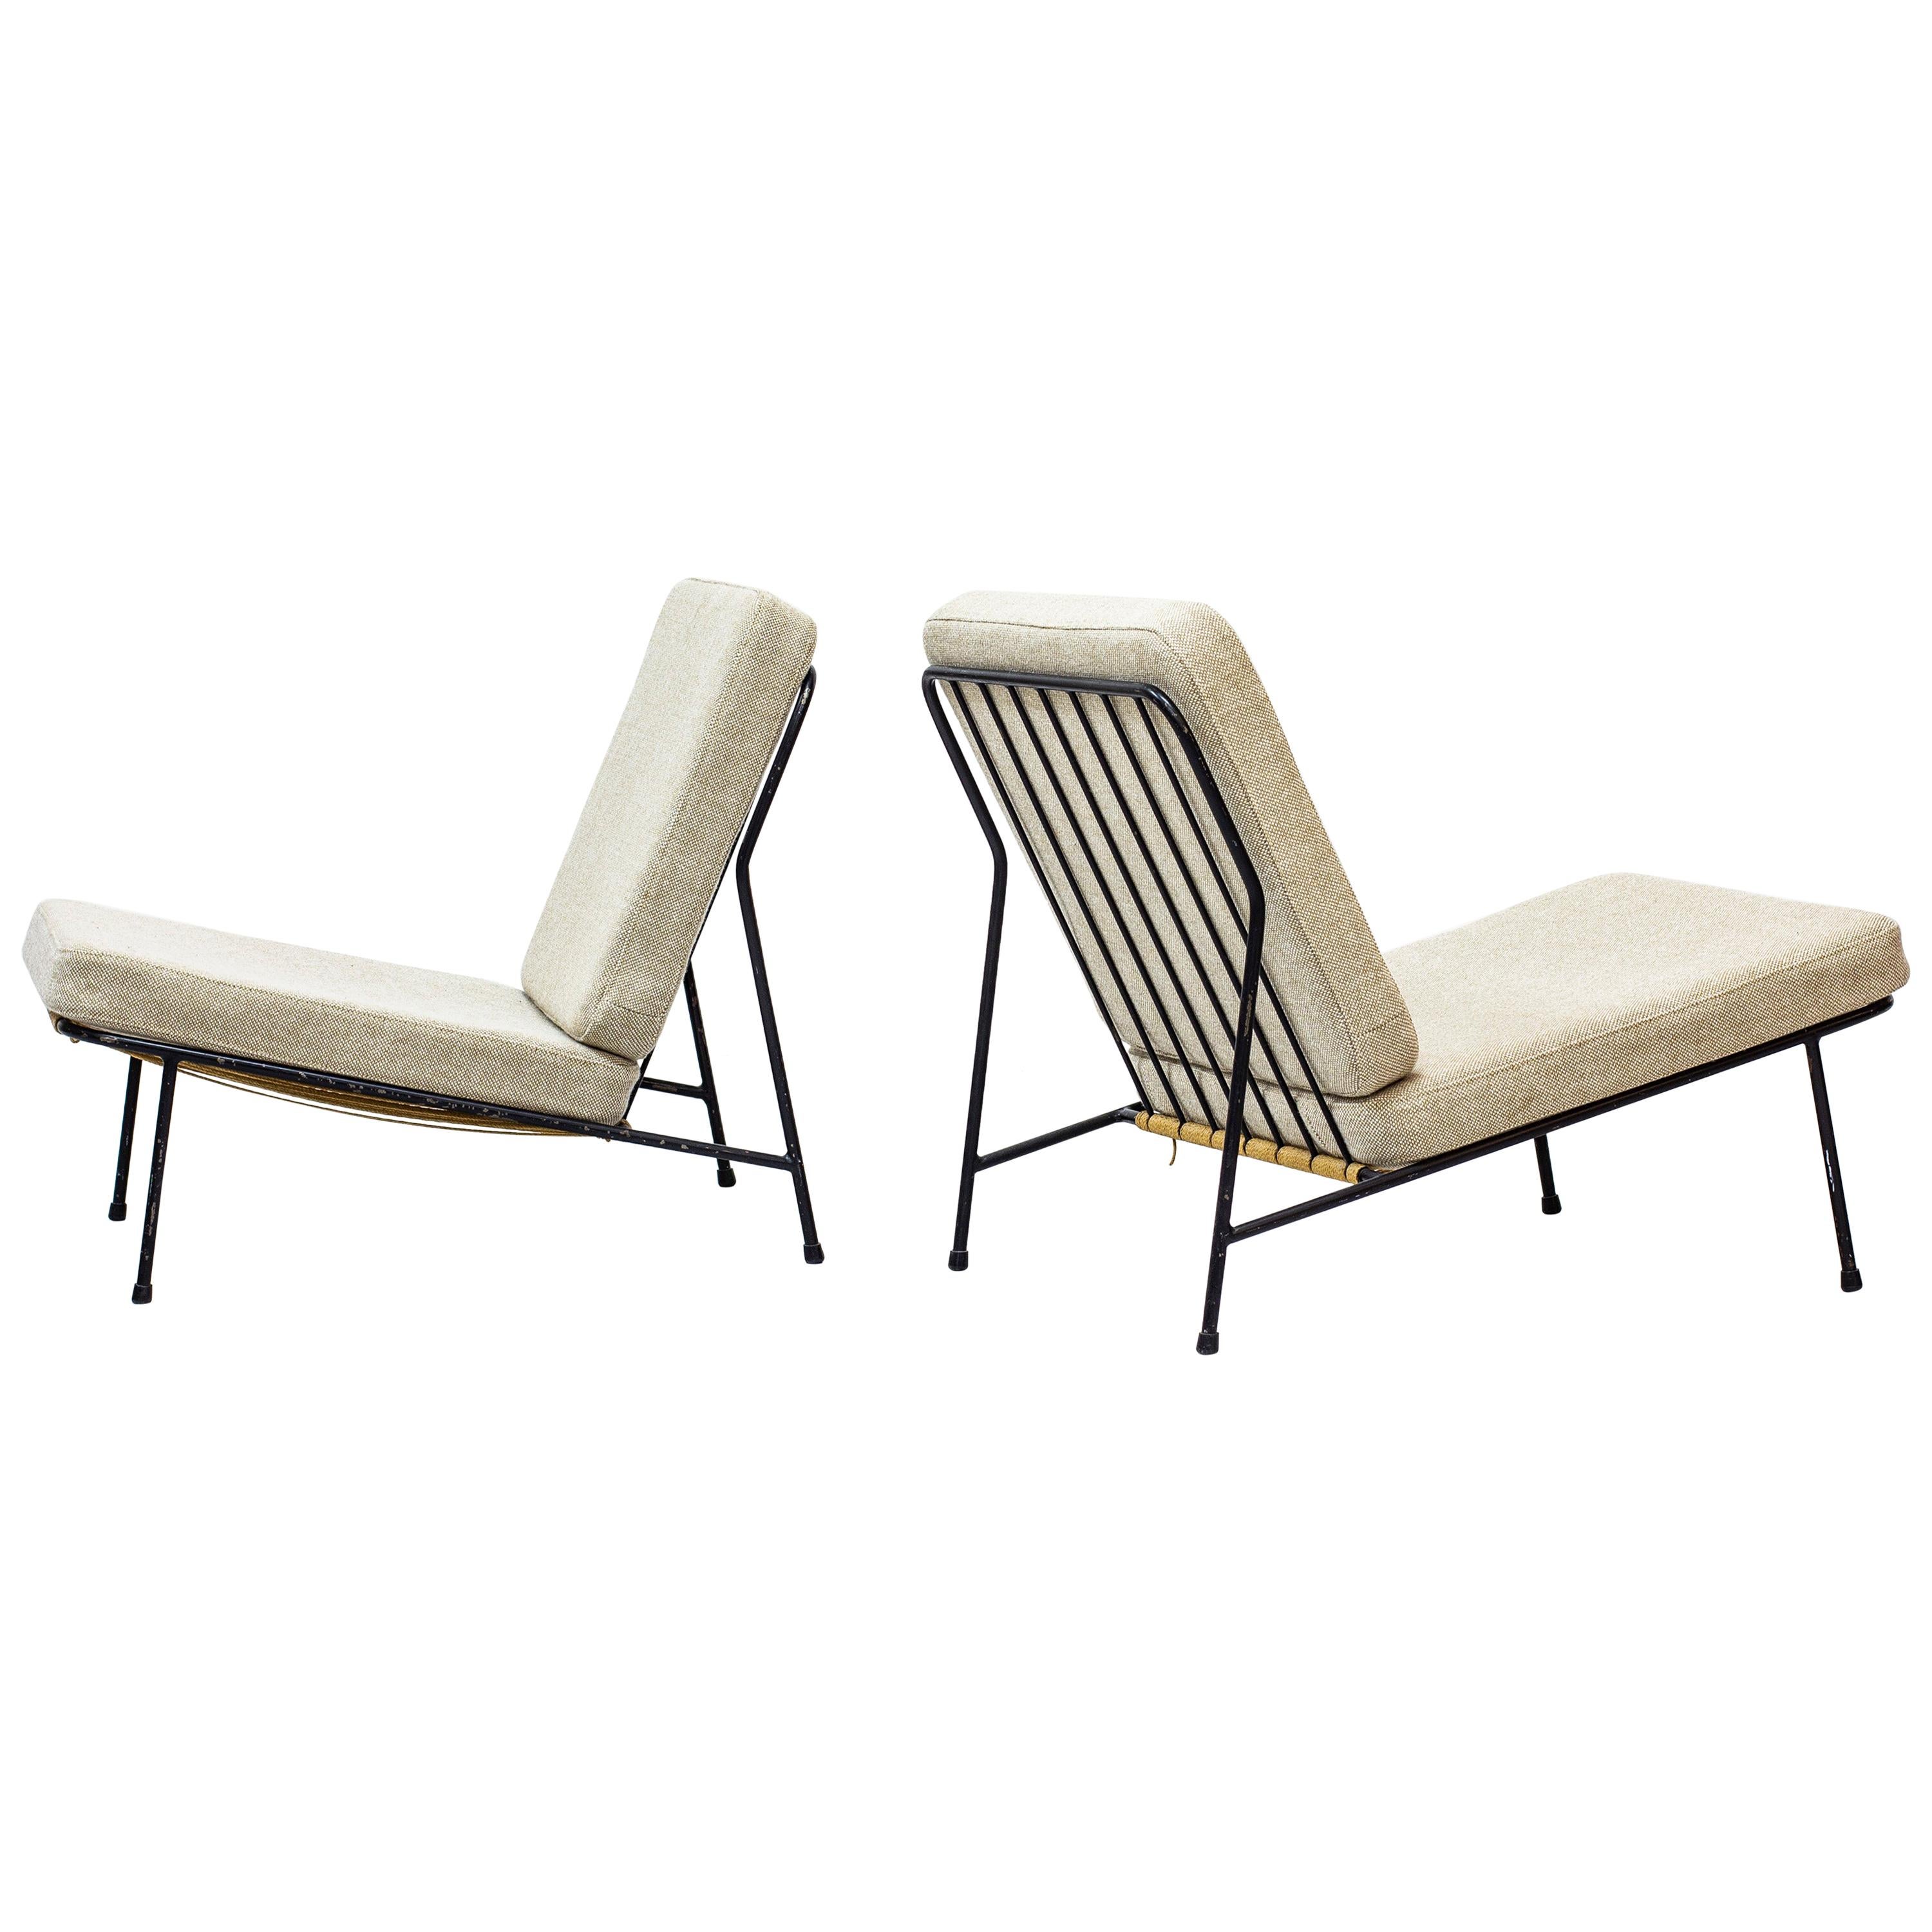 Lounge Chairs by Alf Svensson for Ljungs Industrier, Sweden, Midcentury, 1950s